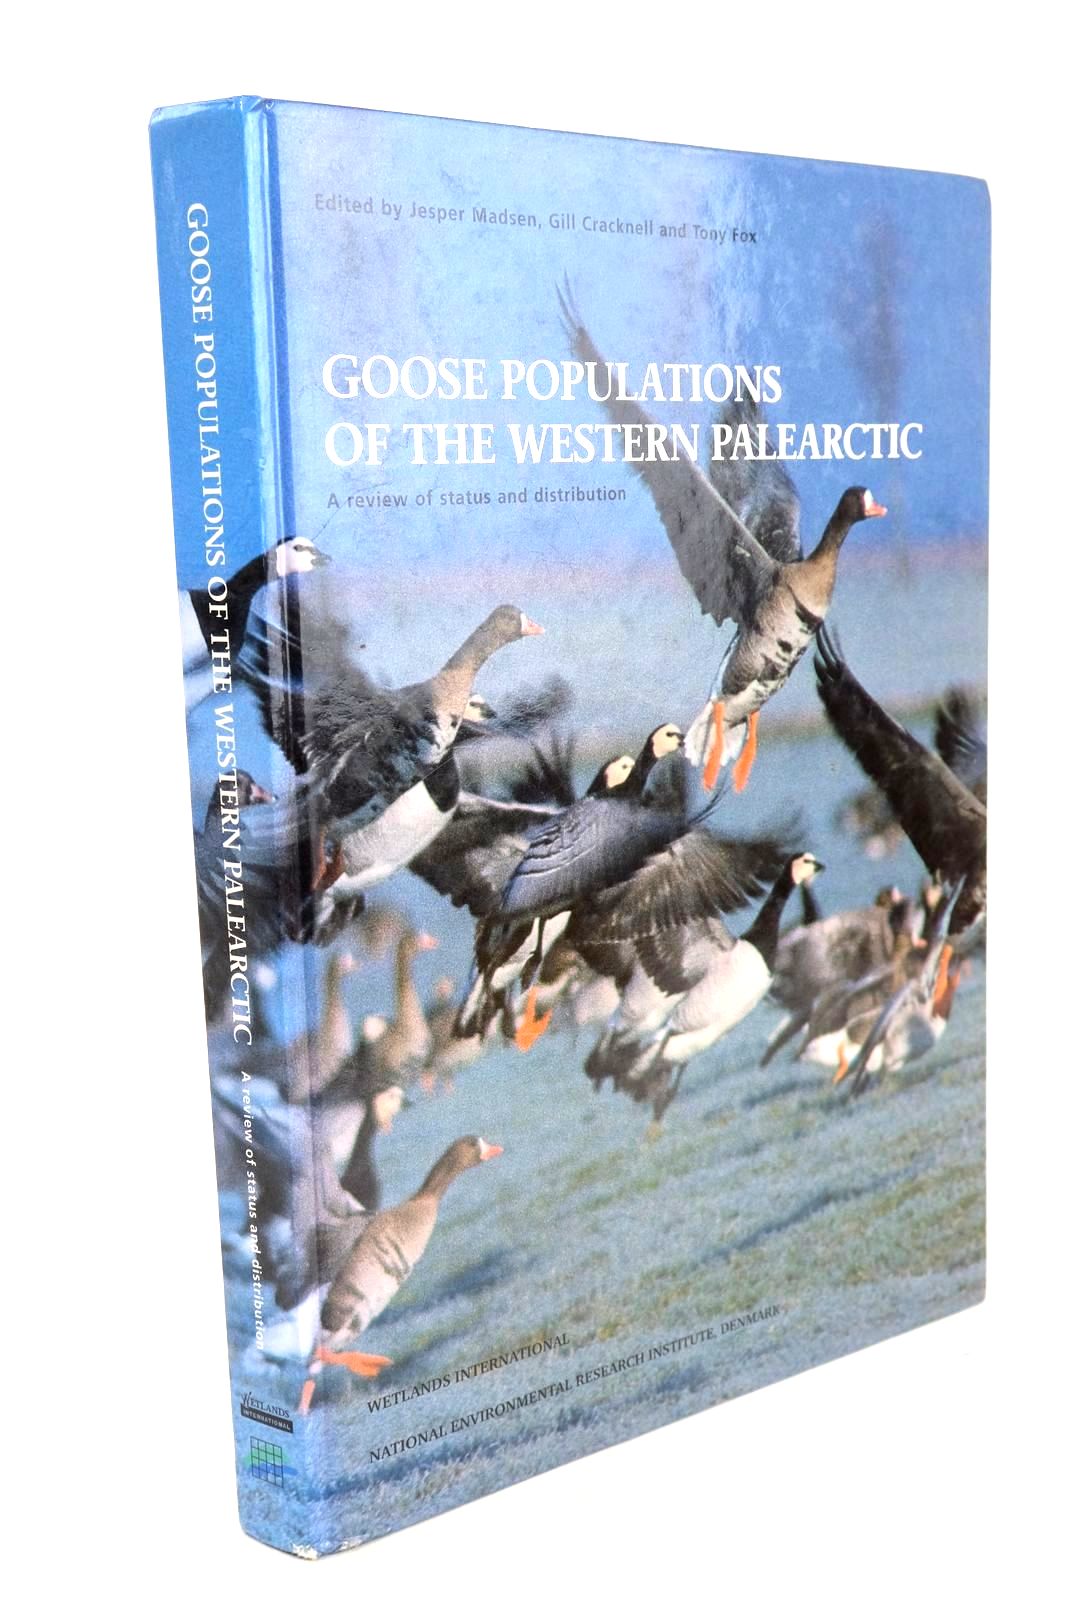 Photo of GOOSE POPULATIONS OF THE WESTERN PALEARCTIC: A REVIEW OF STATUS AND DISTRIBUTION- Stock Number: 1327289